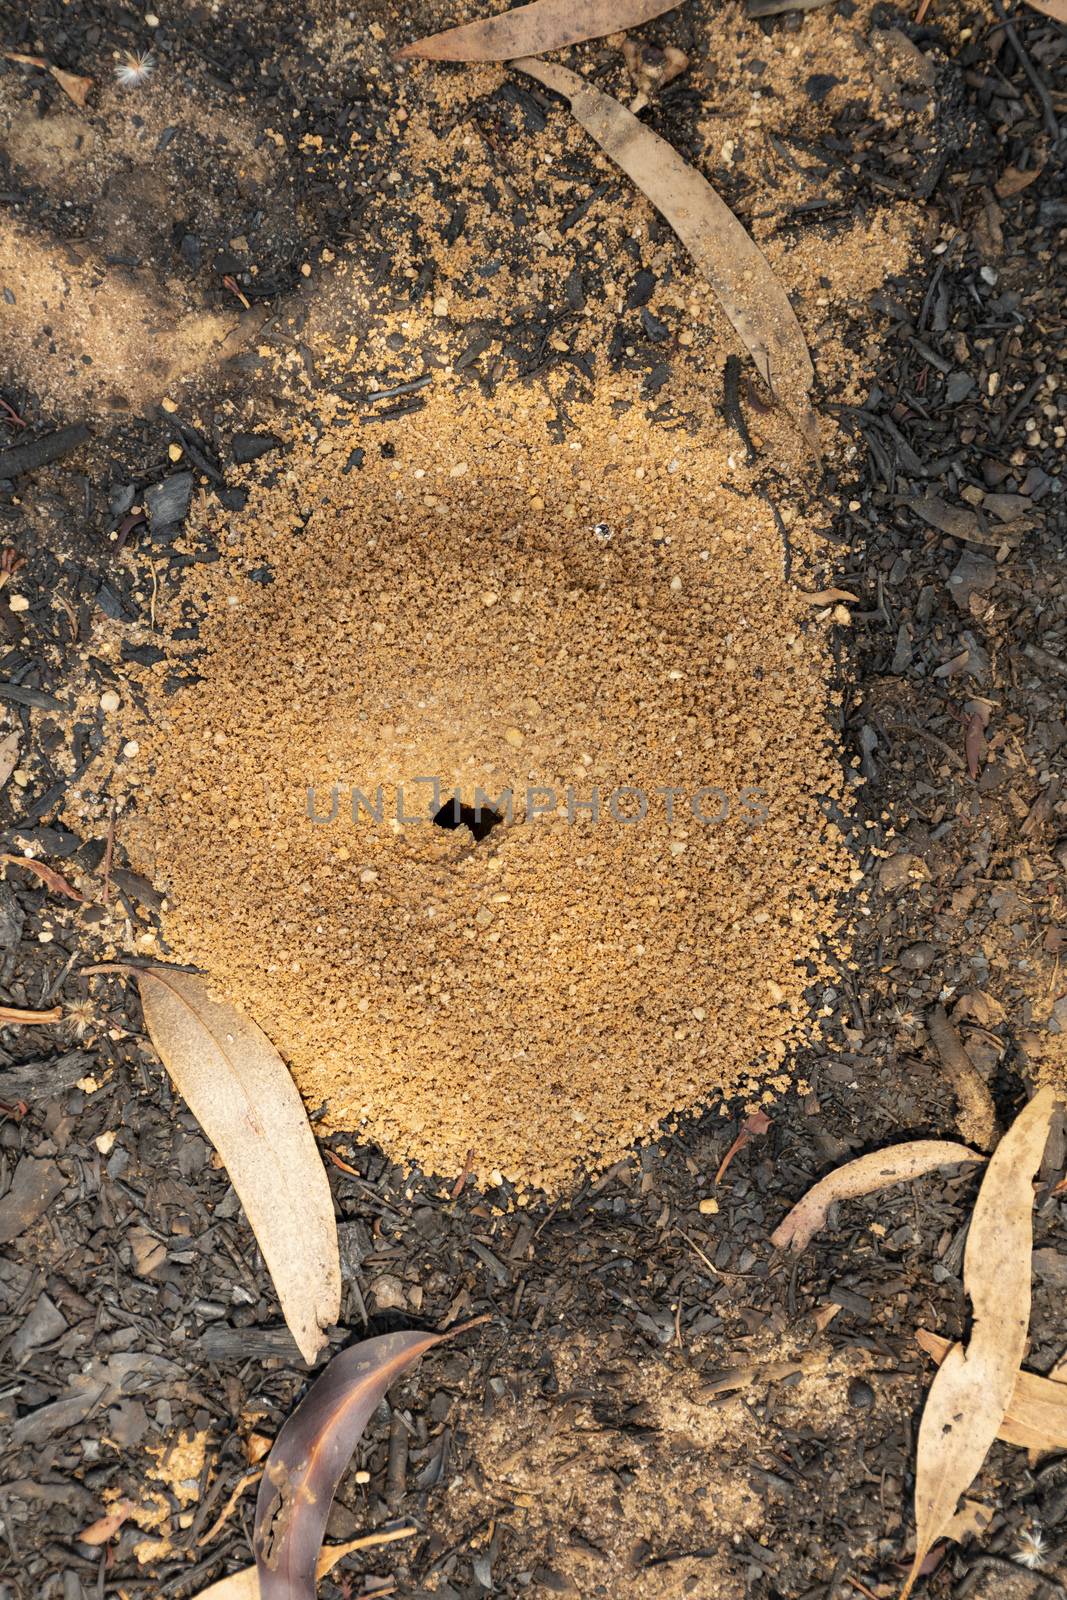 An ants nest on a dirt road after a bushfire in The Blue Mountains by WittkePhotos